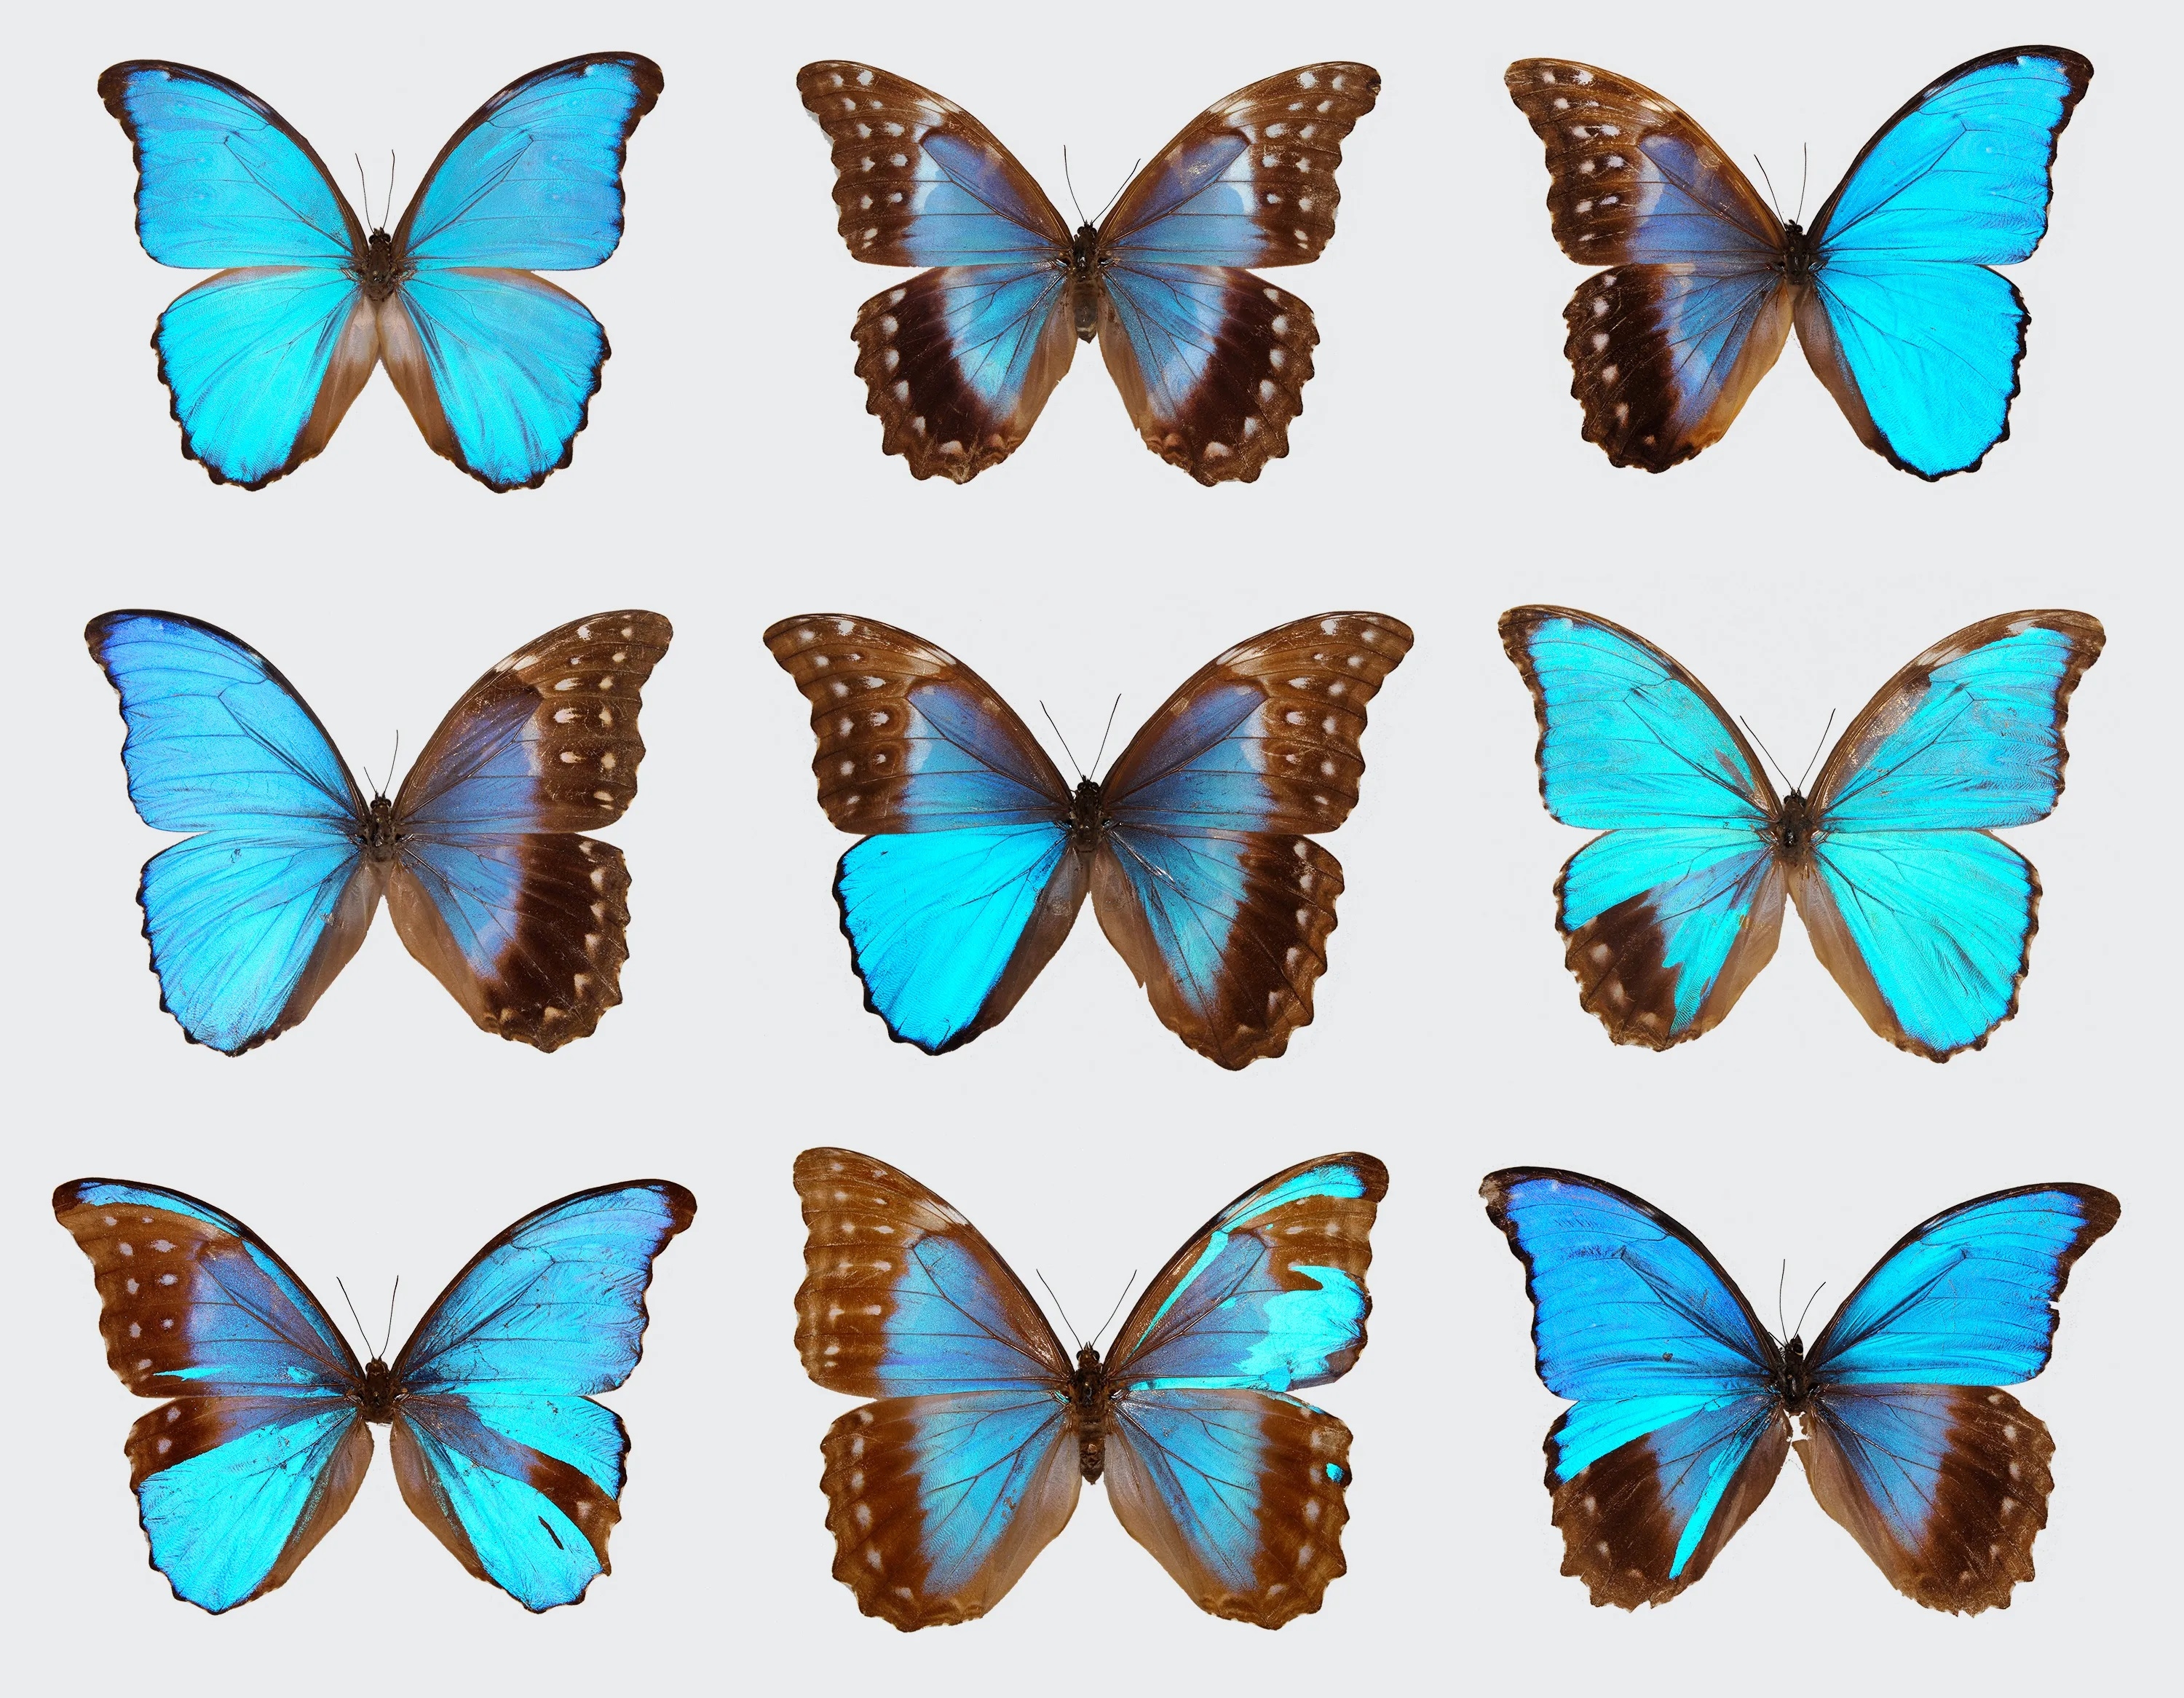 Top left, a male blue morpho butterfly; top middle, a female. The remainder are gynandromorphic, with both male and female characteristics.